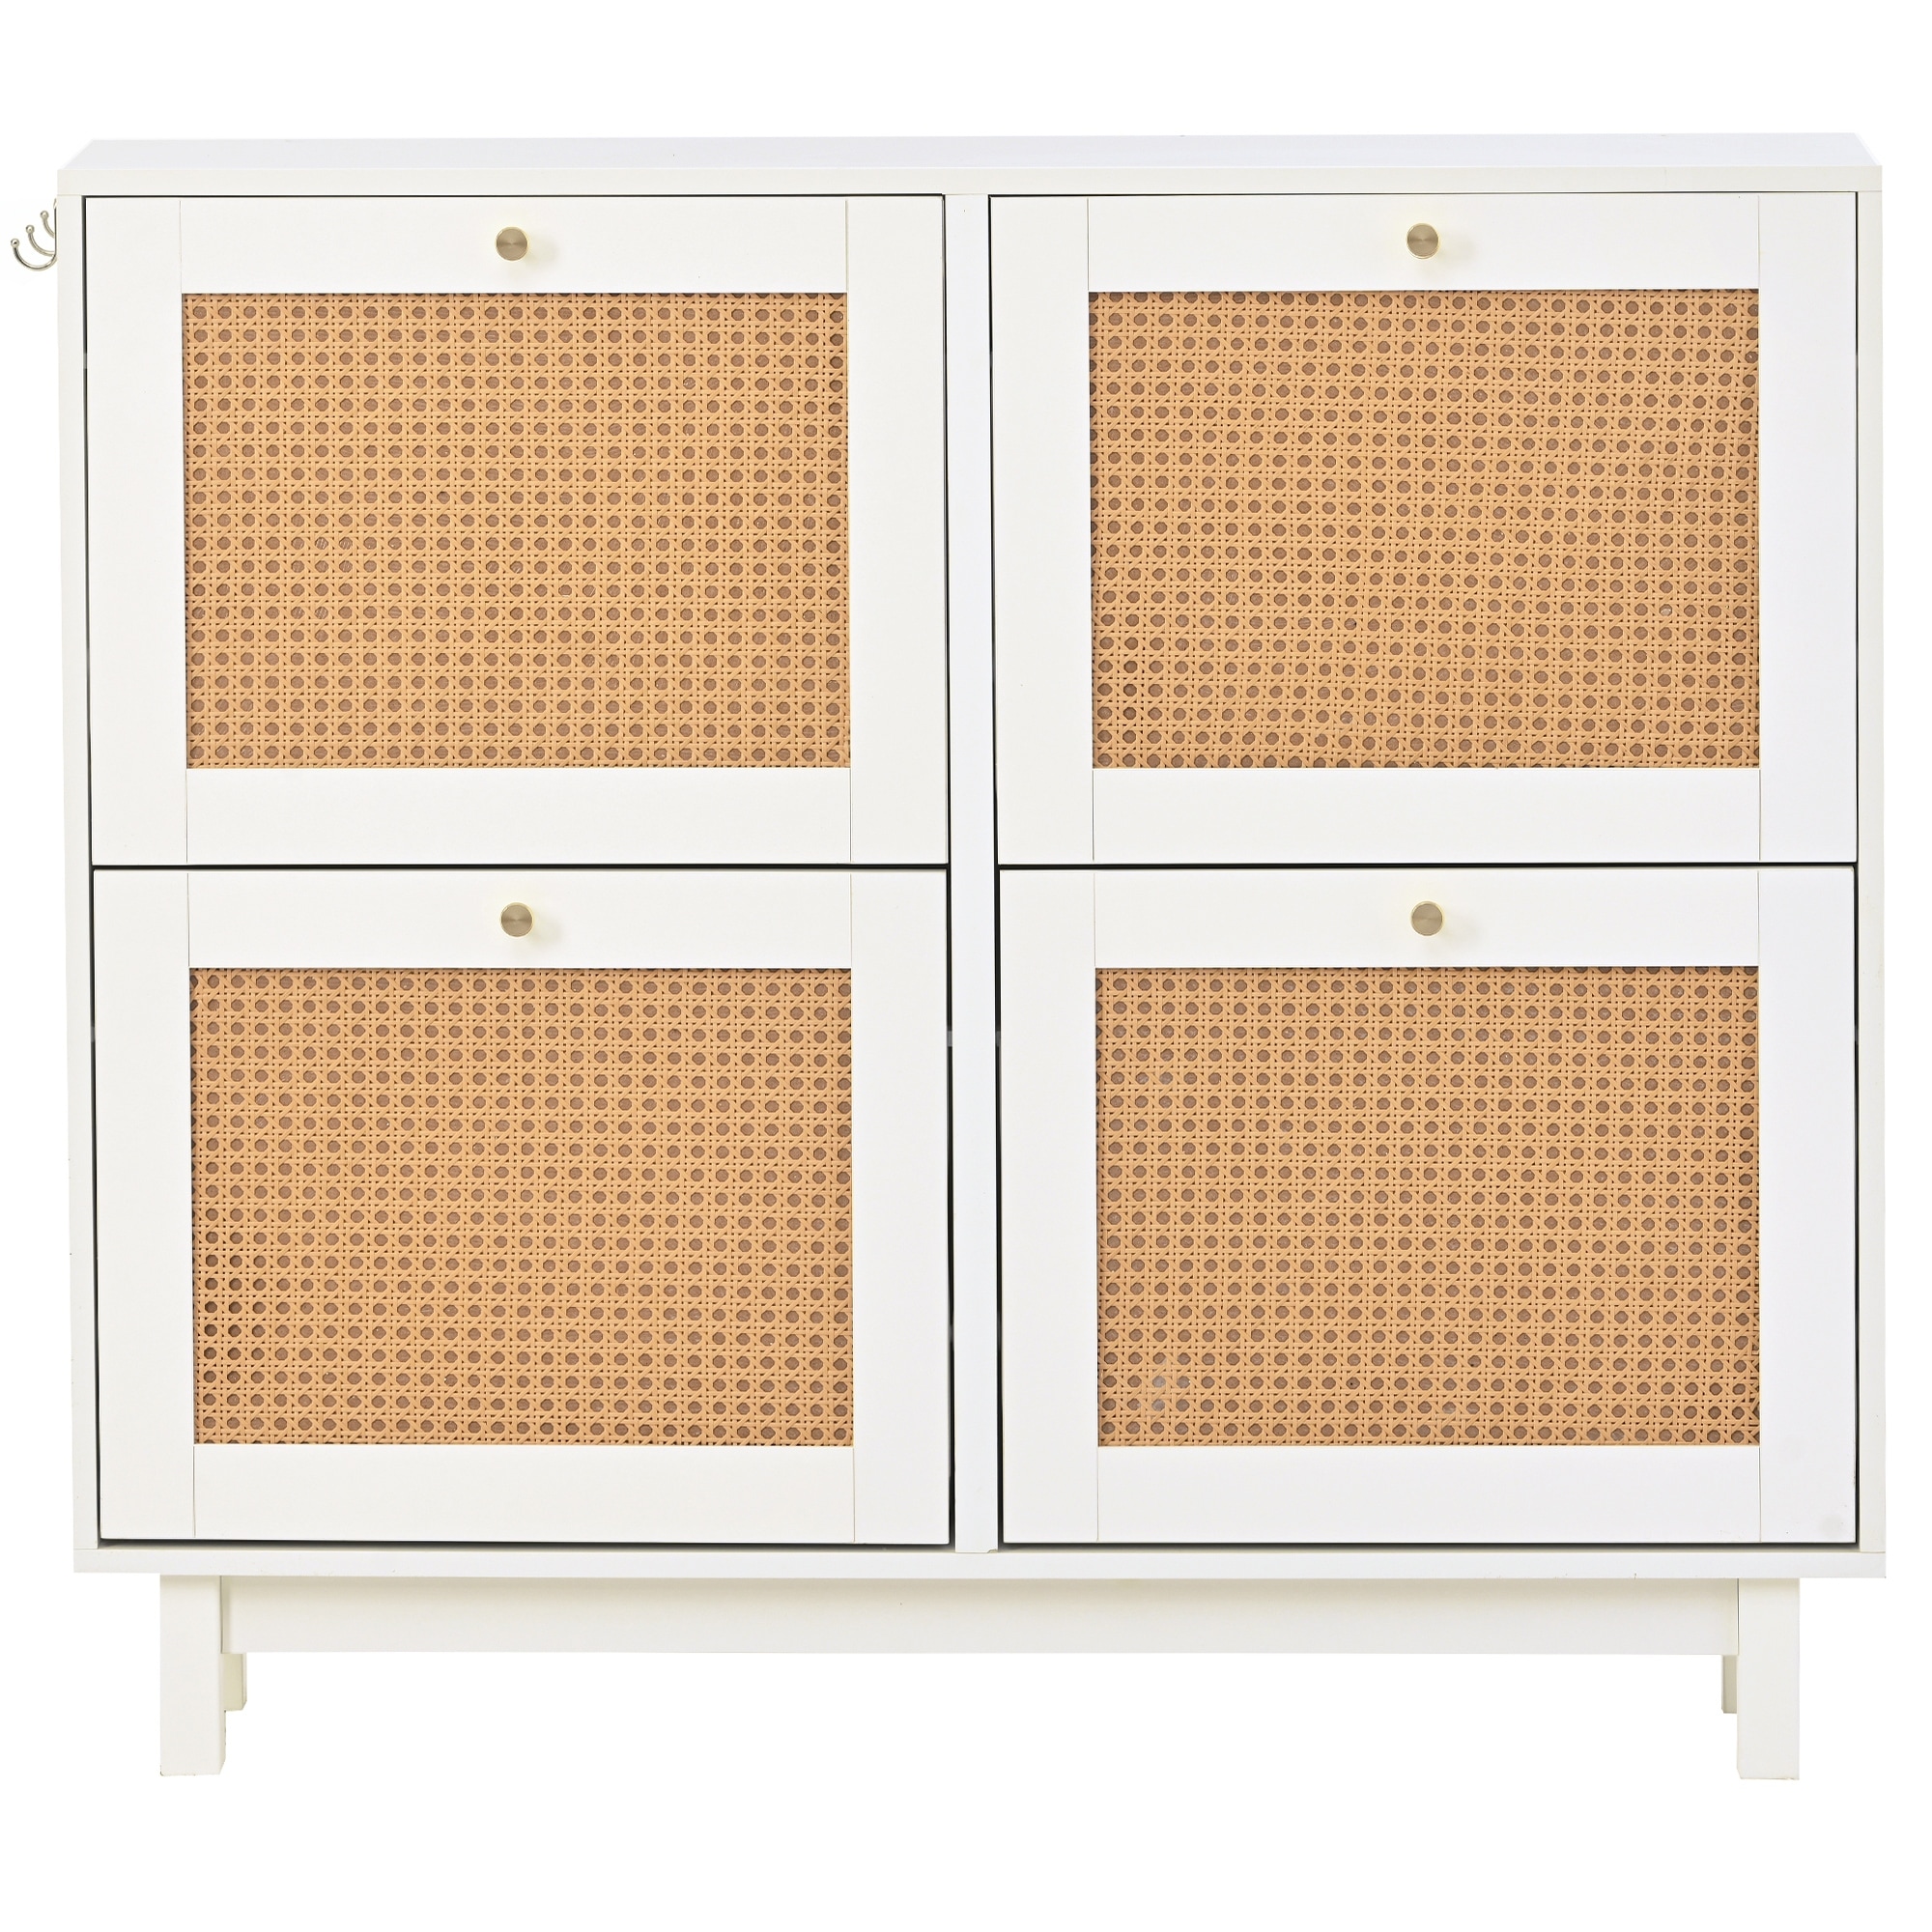 https://ak1.ostkcdn.com/images/products/is/images/direct/2e6a16bac67903e4dd6efd39e45167cd08095163/Rattan-Shoe-Cabinet-with-4-Flip-Drawers%2C-2-Tier-Shoe-Storage-Organizer%2C-Free-Standing-Shoe-Rack.jpg